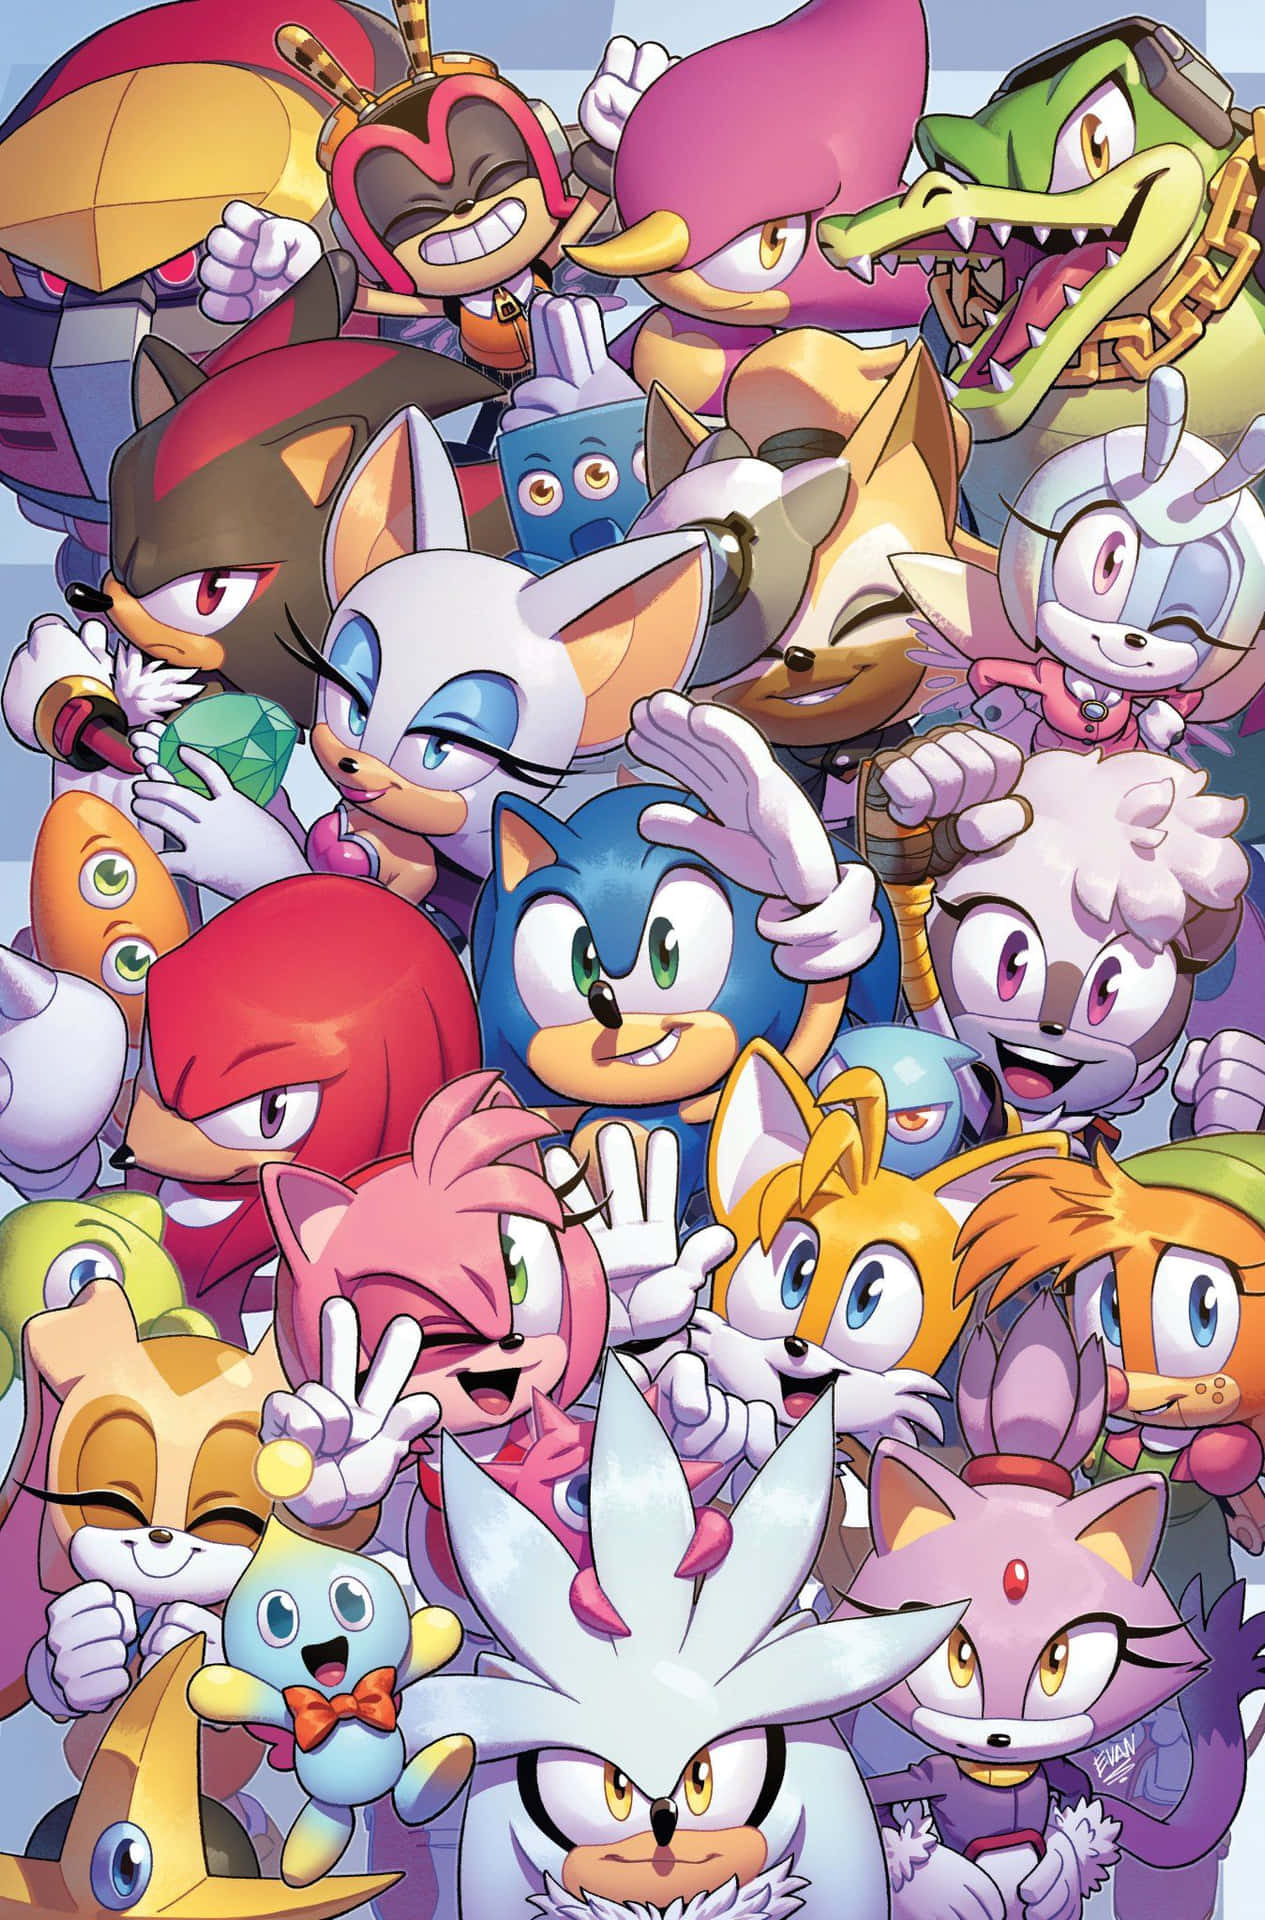 100+] Sonic Characters Wallpapers